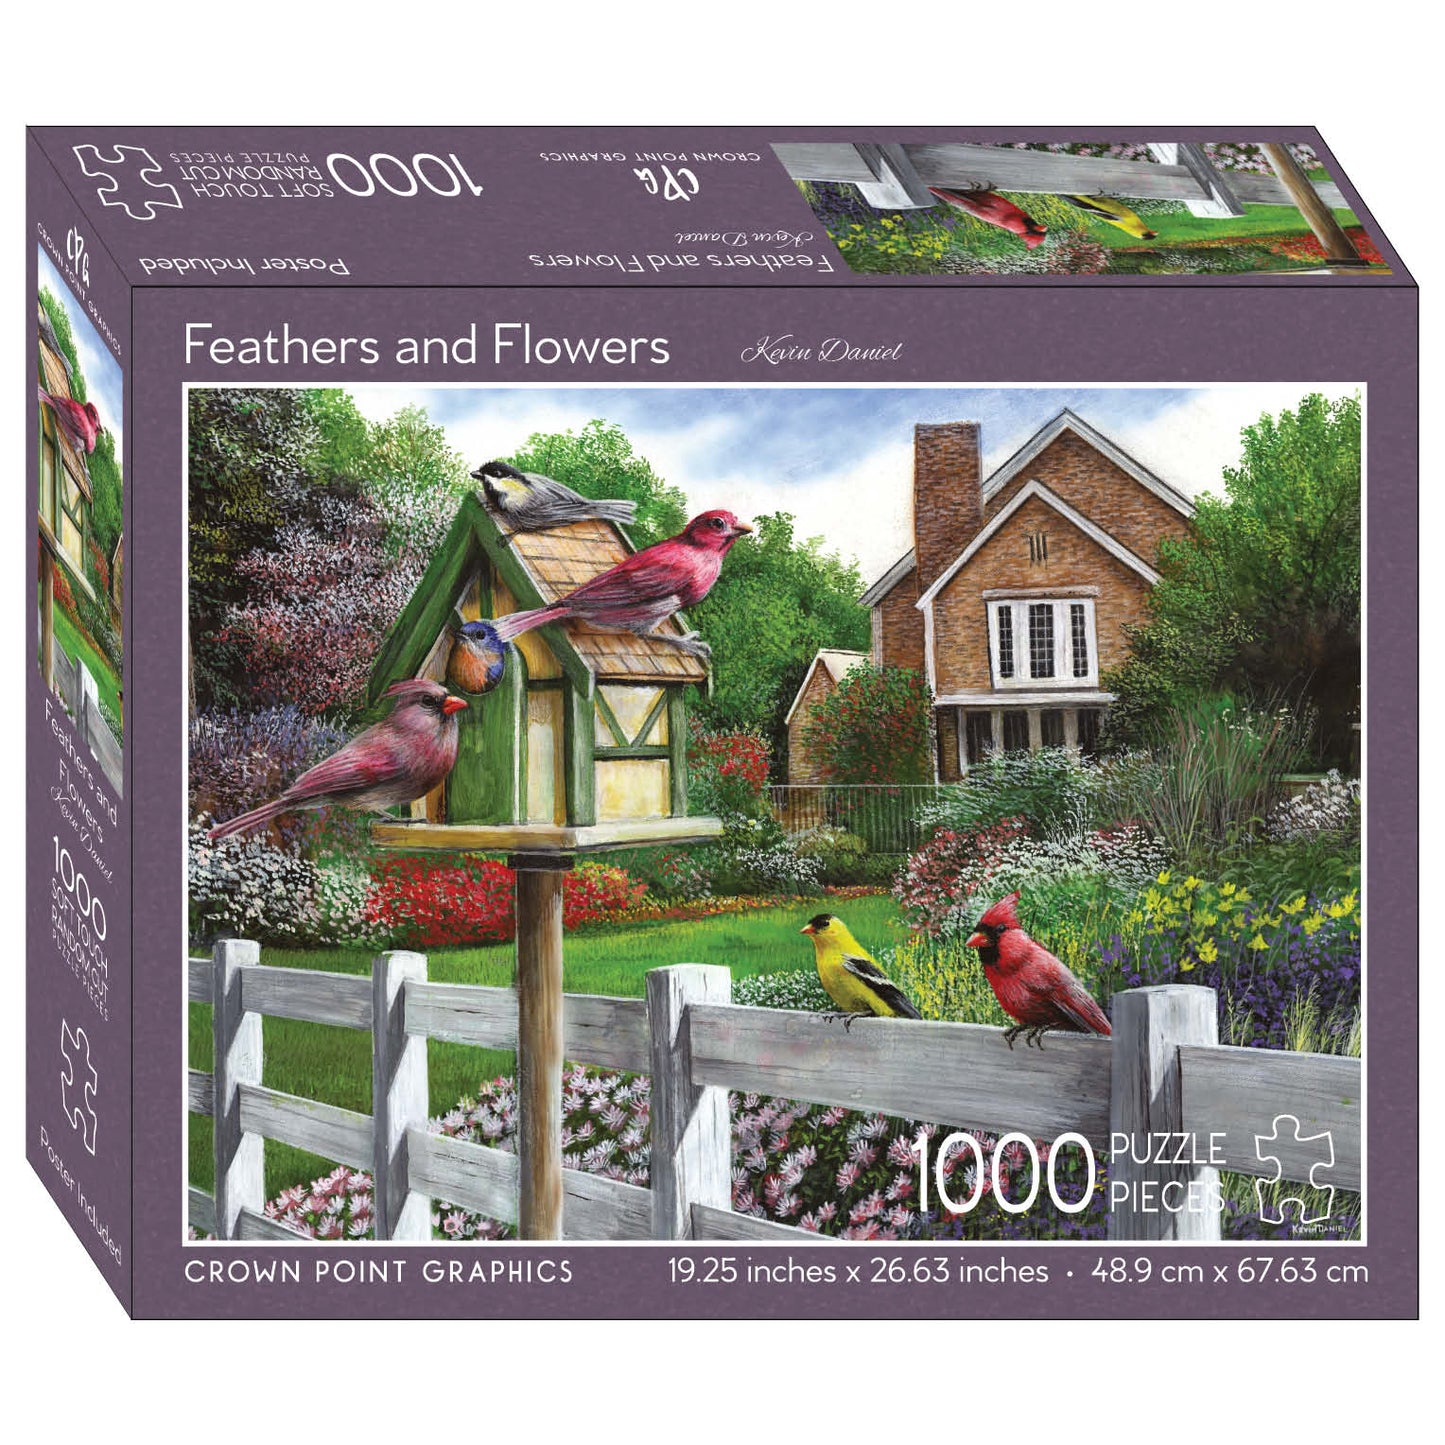 Feathers and Flowers- 1000 Piece Jigsaw Puzzle